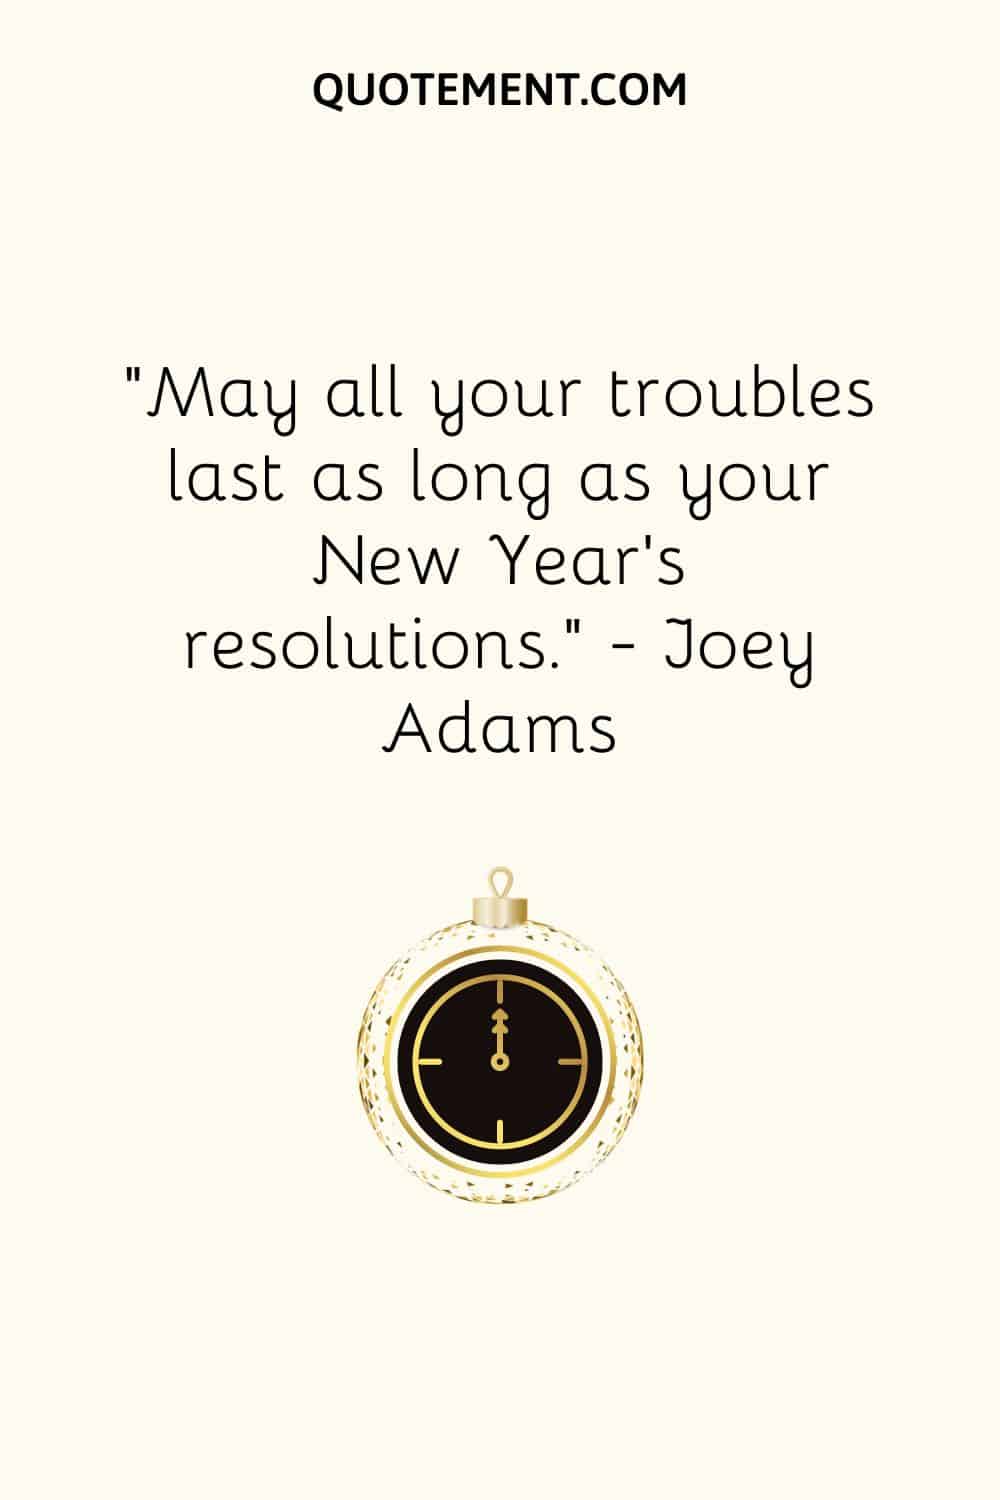 “May all your troubles last as long as your New Year’s resolutions.” — Joey Adams